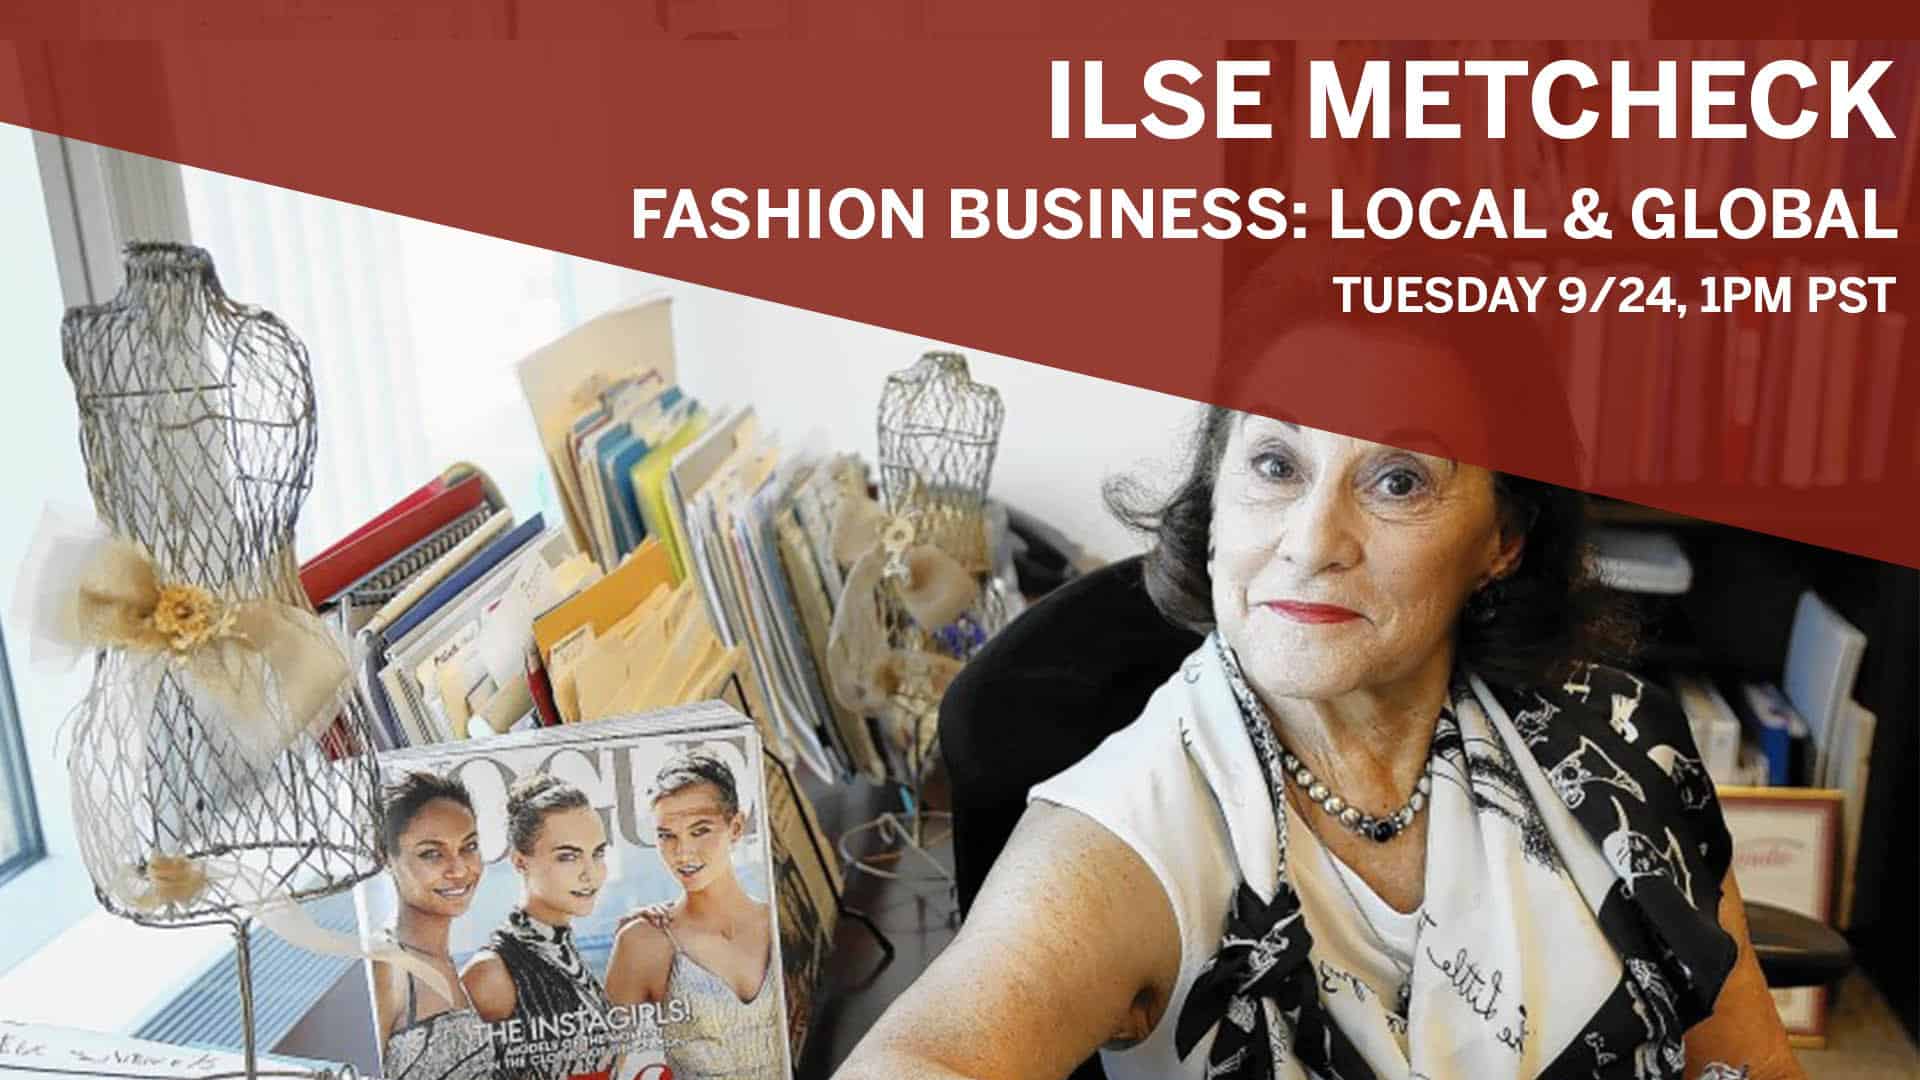 Ilse Metcheck: Fashion Business: Local & Global